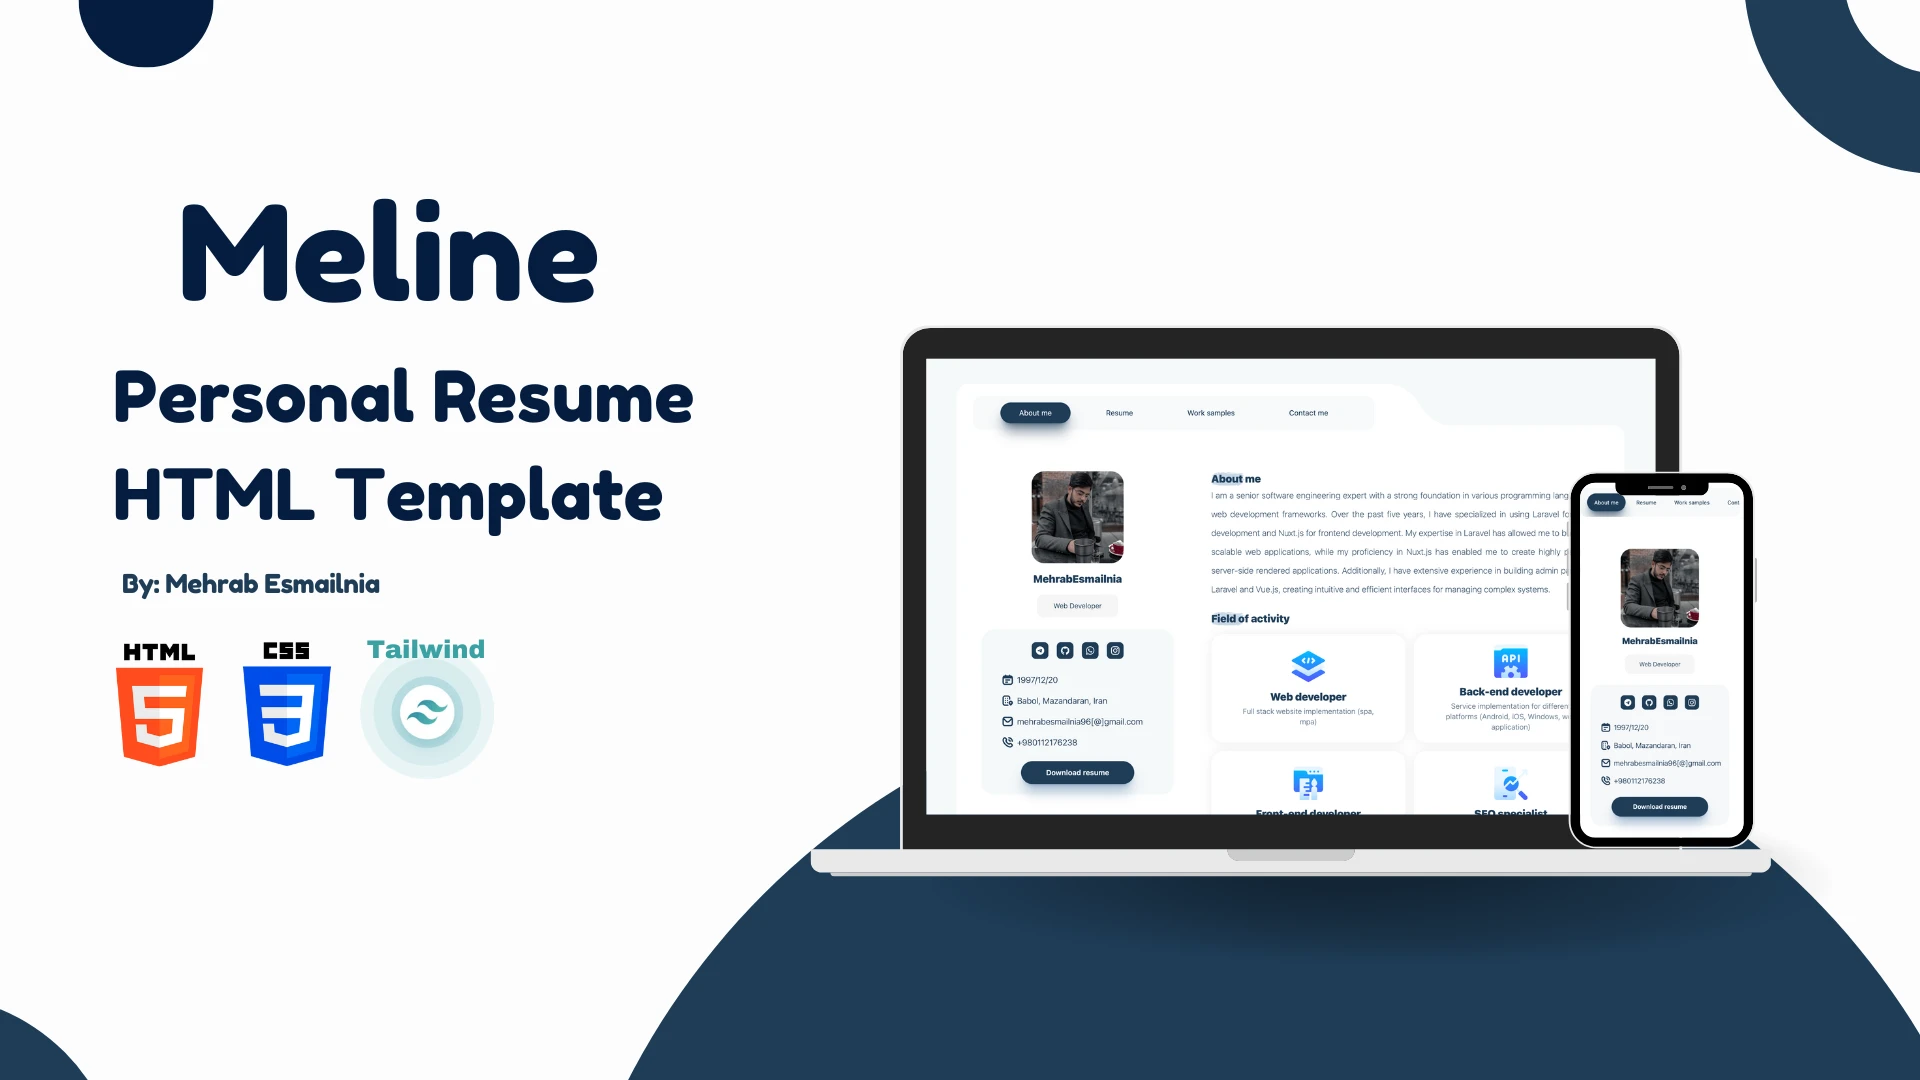 Meline Personal Resume HTML Template